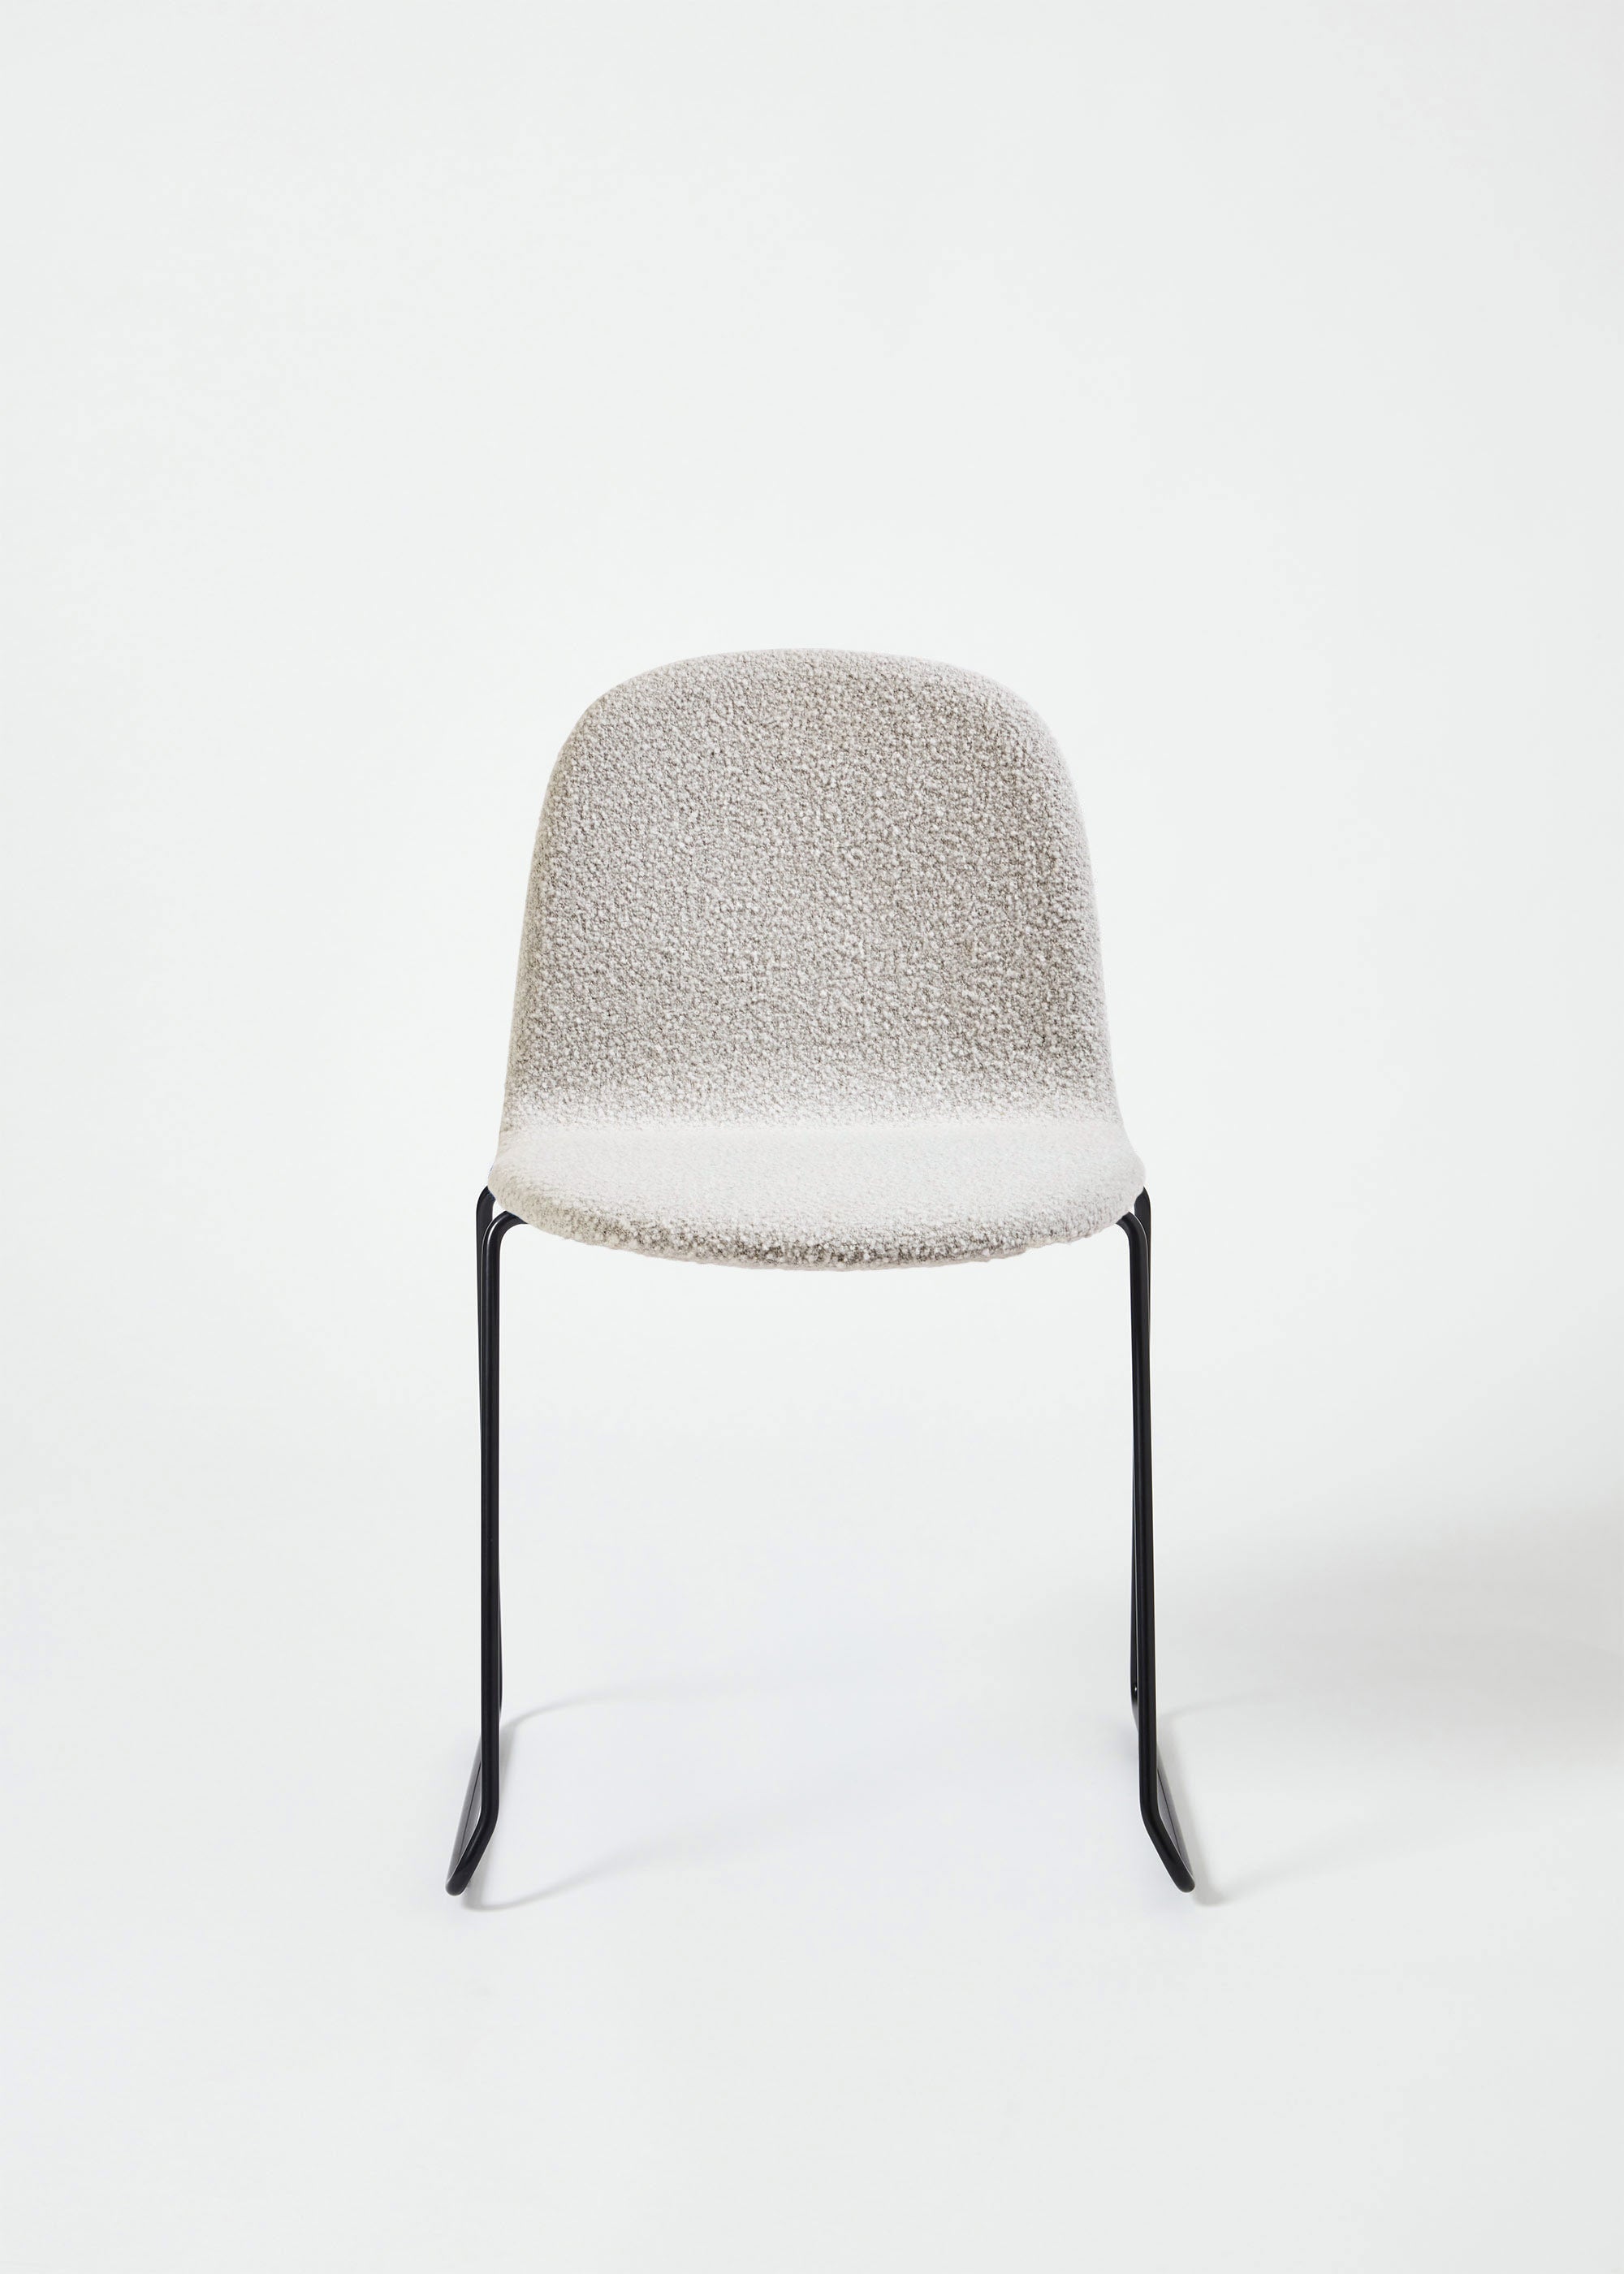 Potato Chair | Stacking Sled Timber & Upholstered Dining Office Chair with Handle | GibsonKarlo | DesignByThem ** HF5 Elle - 0230